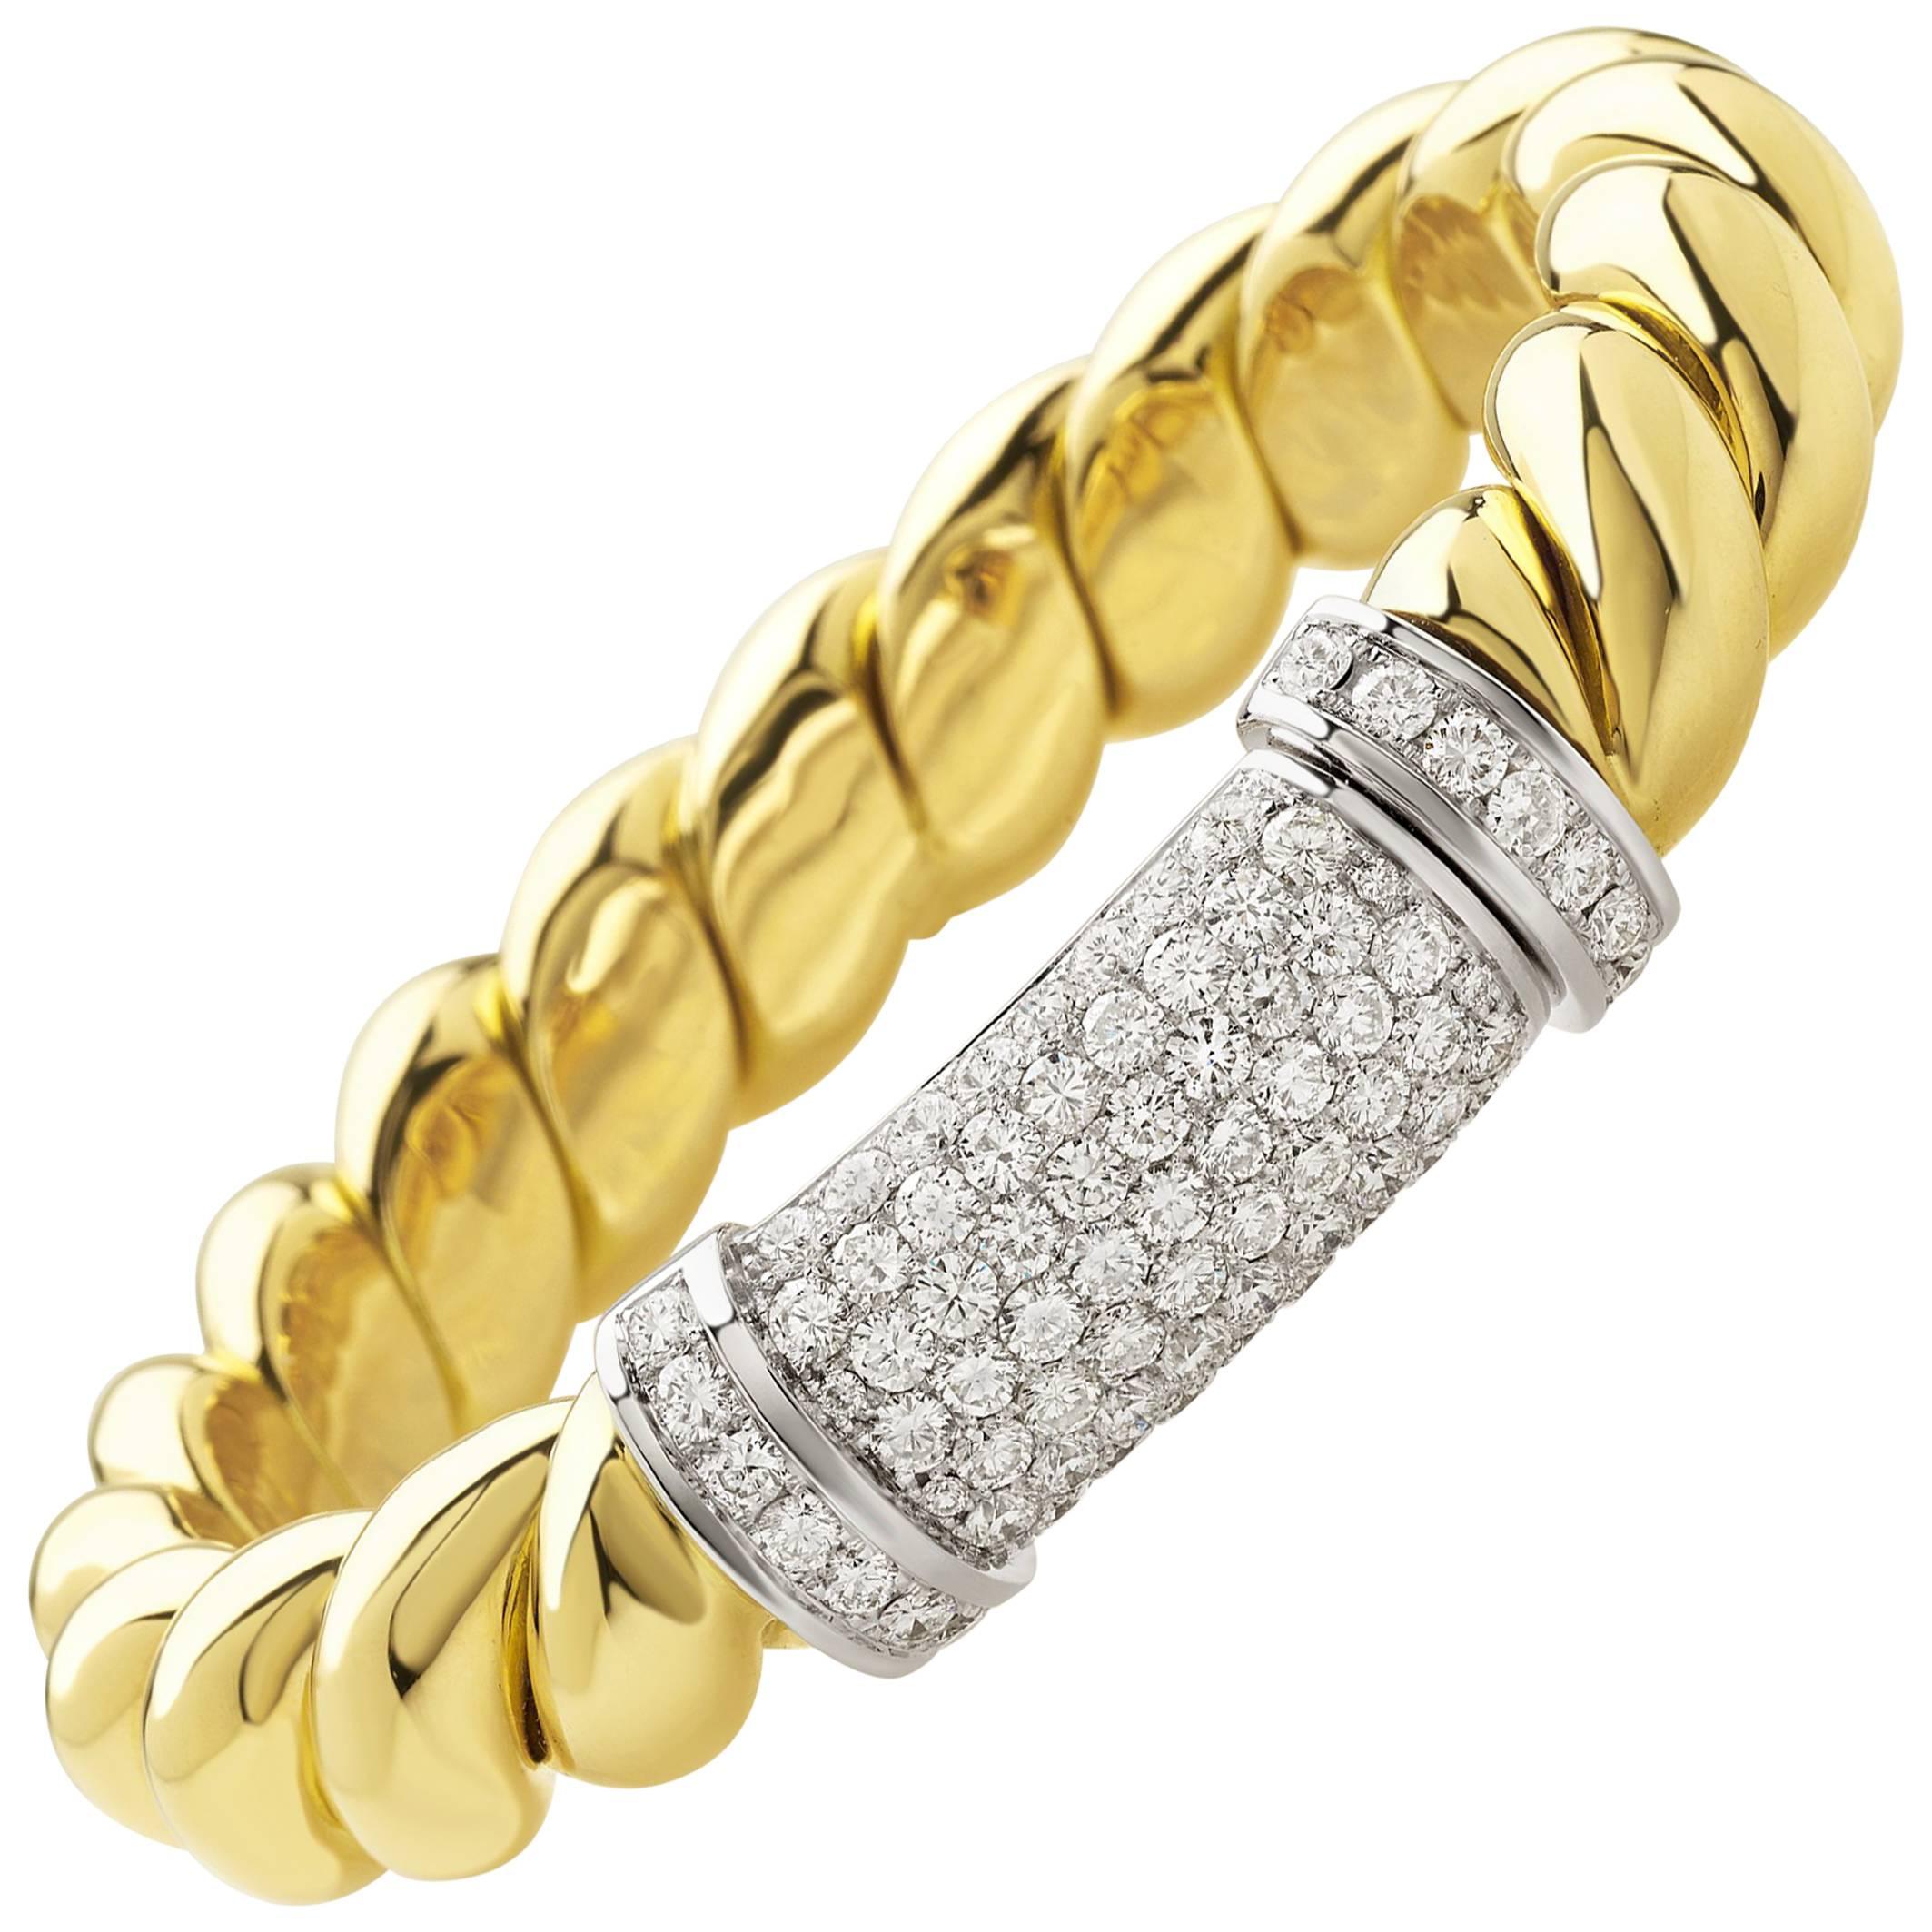 Bangle from the Collection "Rope" 18 Karat Yellow Gold and Diamonds